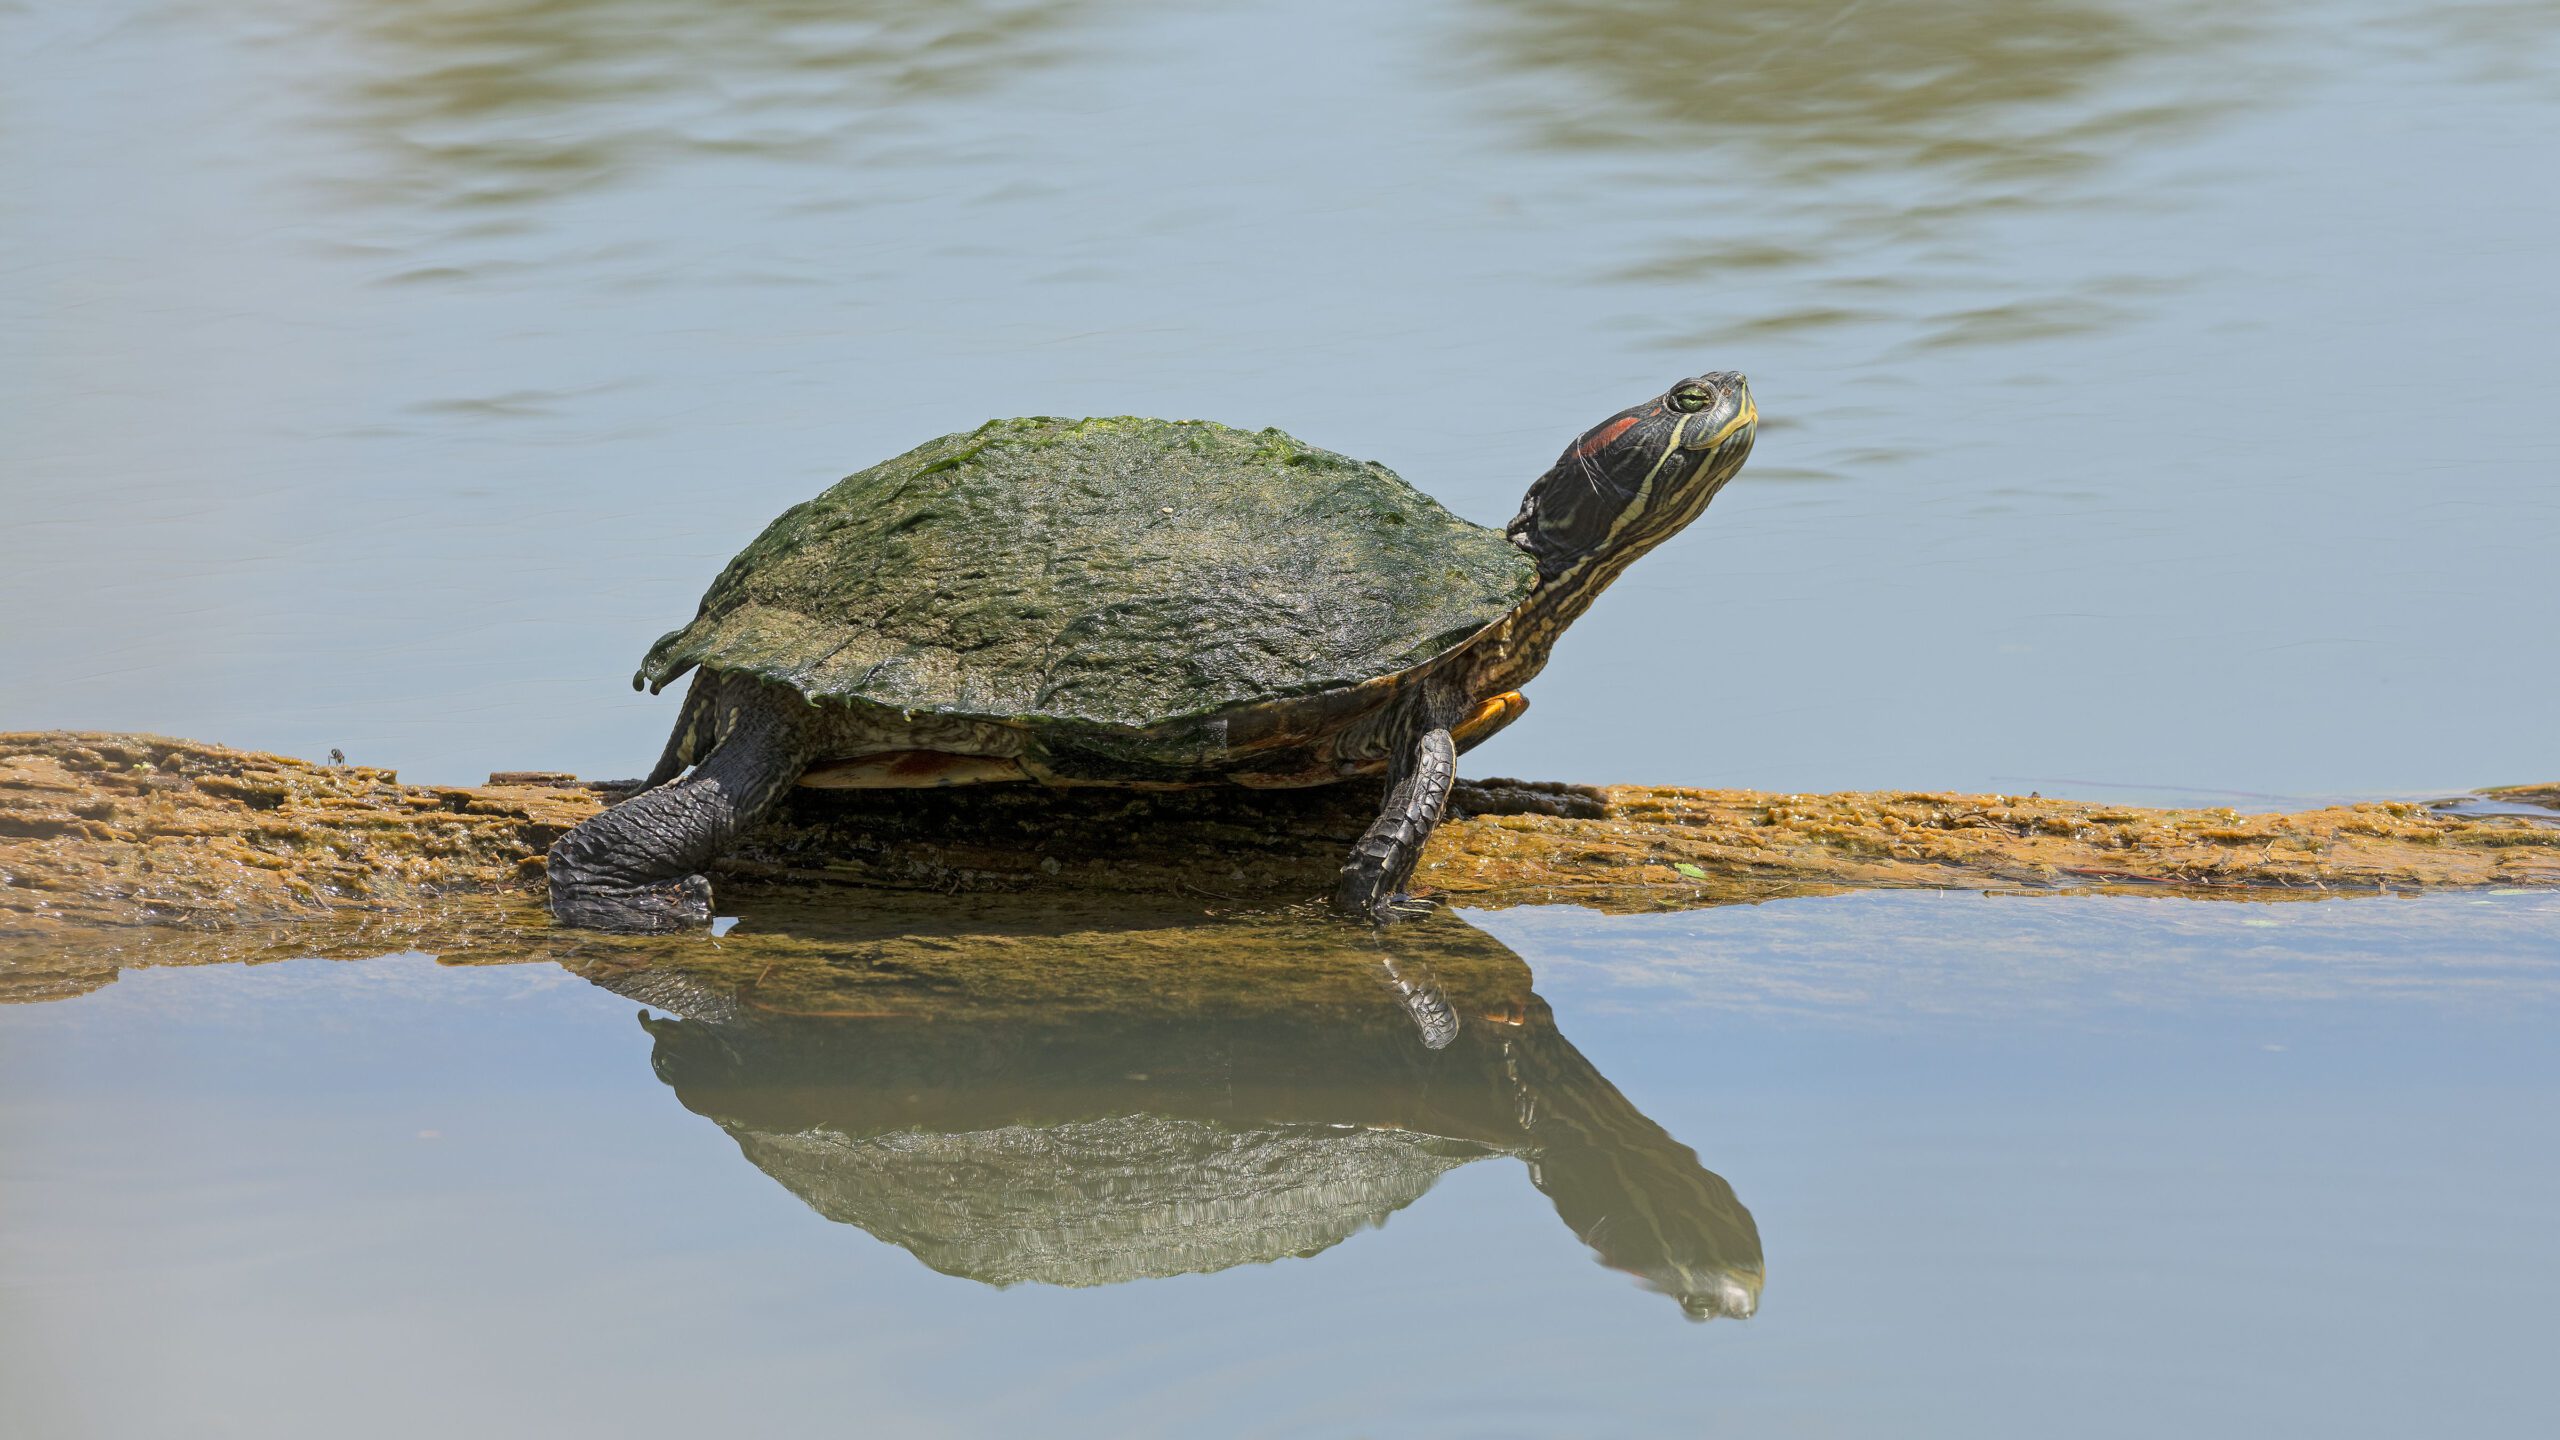 A turtle on a log and its reflection.